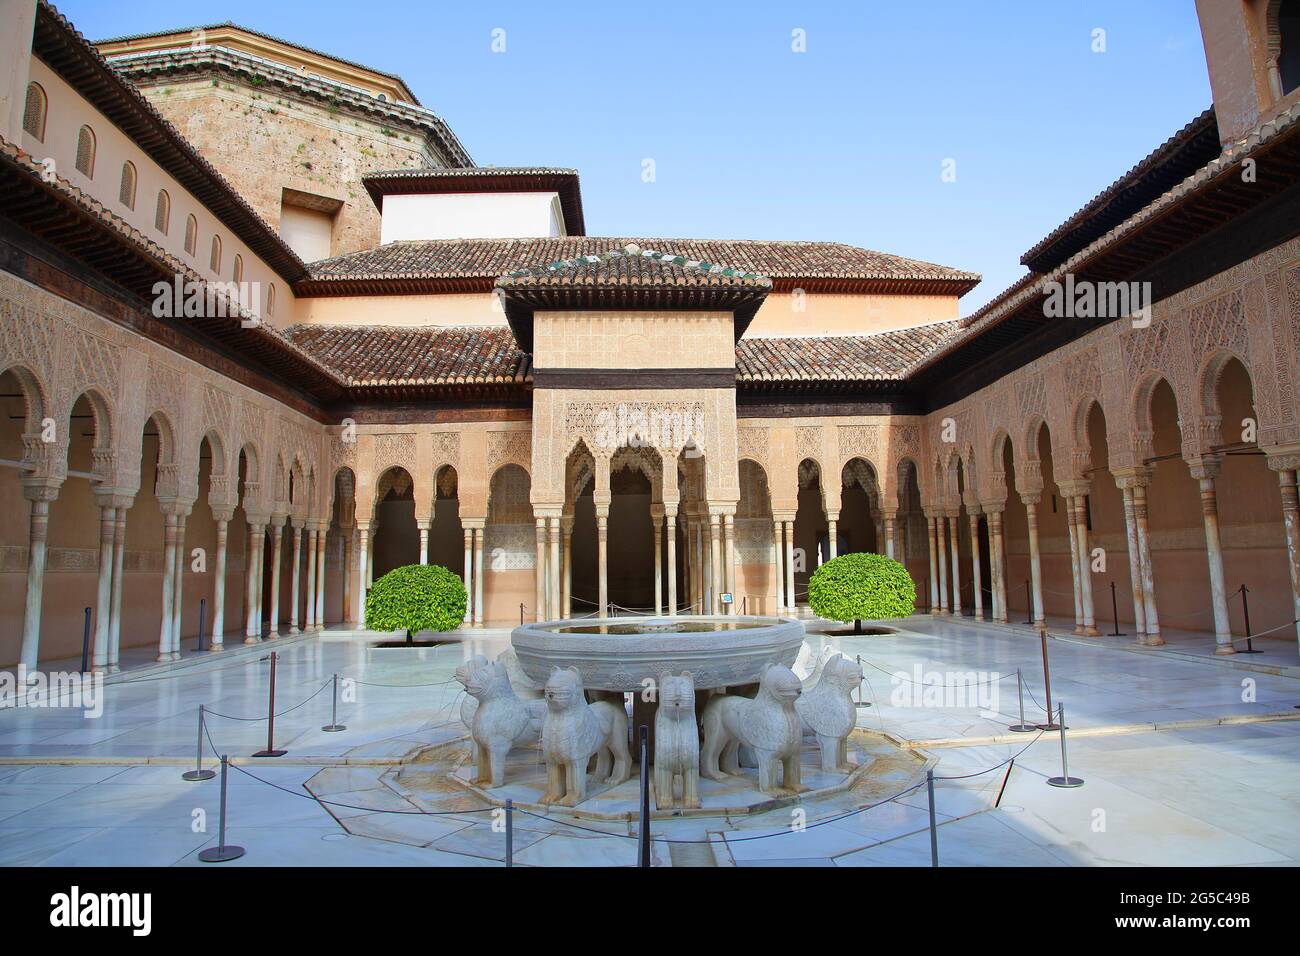 The Patio of the Lions (Patio de los Leones) the most famous place of the Alhambra in Granada.On top of the hill al-Sabika,on the bank of the river Darro,Granada Spain.Constructed as a fortress in 889 CE.,then largely ignored.Rebuilt mid-13th century by Arab Nasrid emir Mohammed ben Al-Ahmar of the Emirate of Granada,After the Christian Reconquista in 1492,the site became the Royal Court of Ferdinand and Isabella. Stock Photo